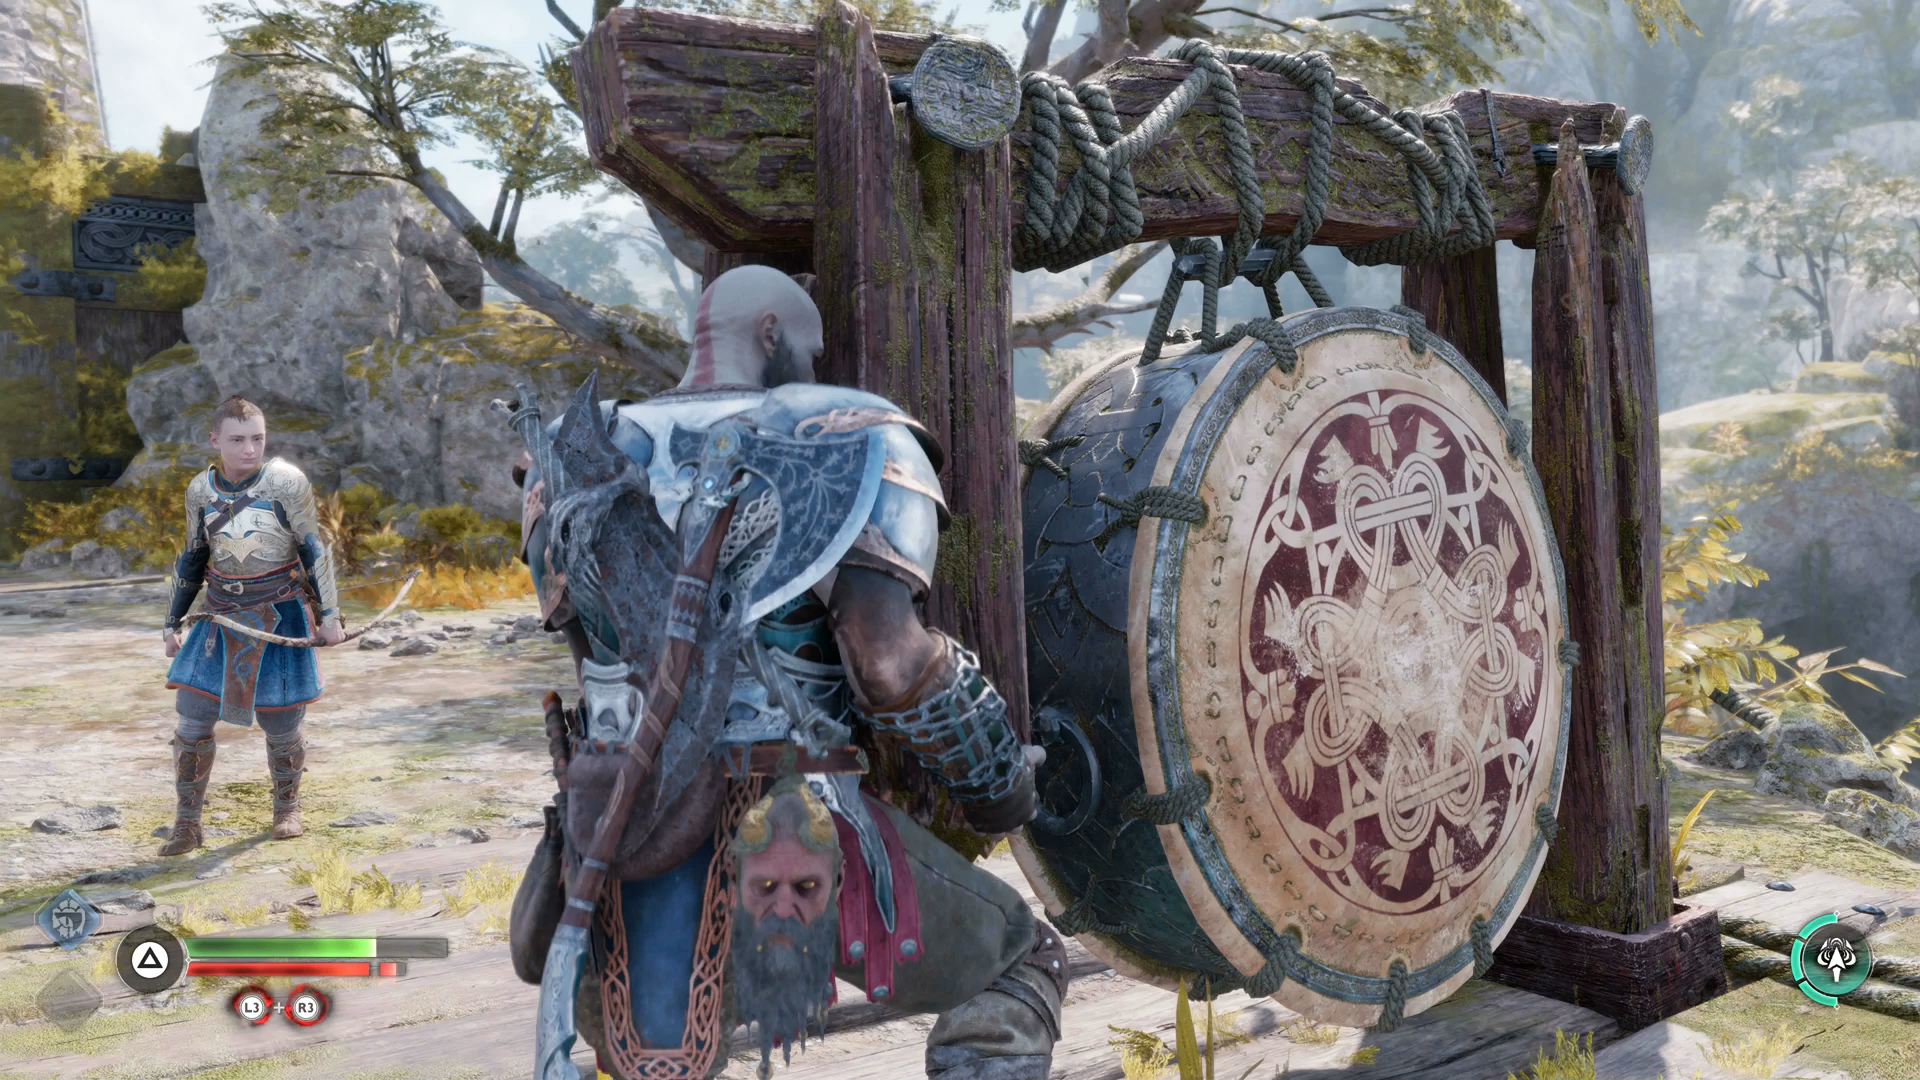 Kratos and Atreus sound a giant drum during the Weight of Chains quest in God of War Ragnarok